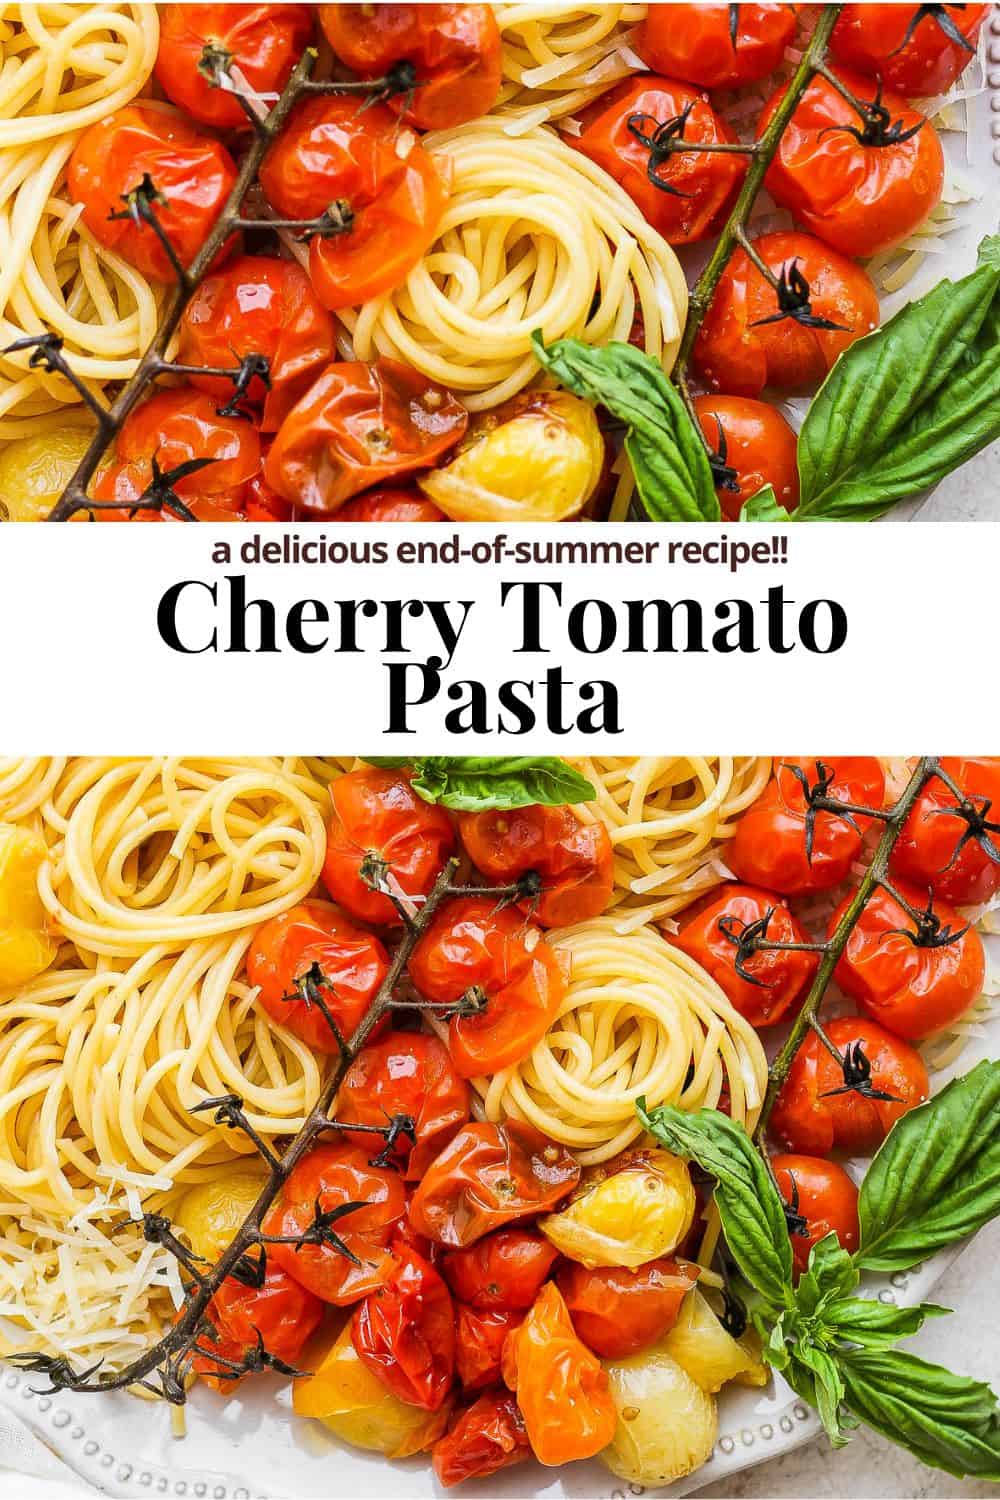 Pinterest image showing cherry tomato pasta with the title "cherry tomato pasta. A delicious end-of-summer recipe!".